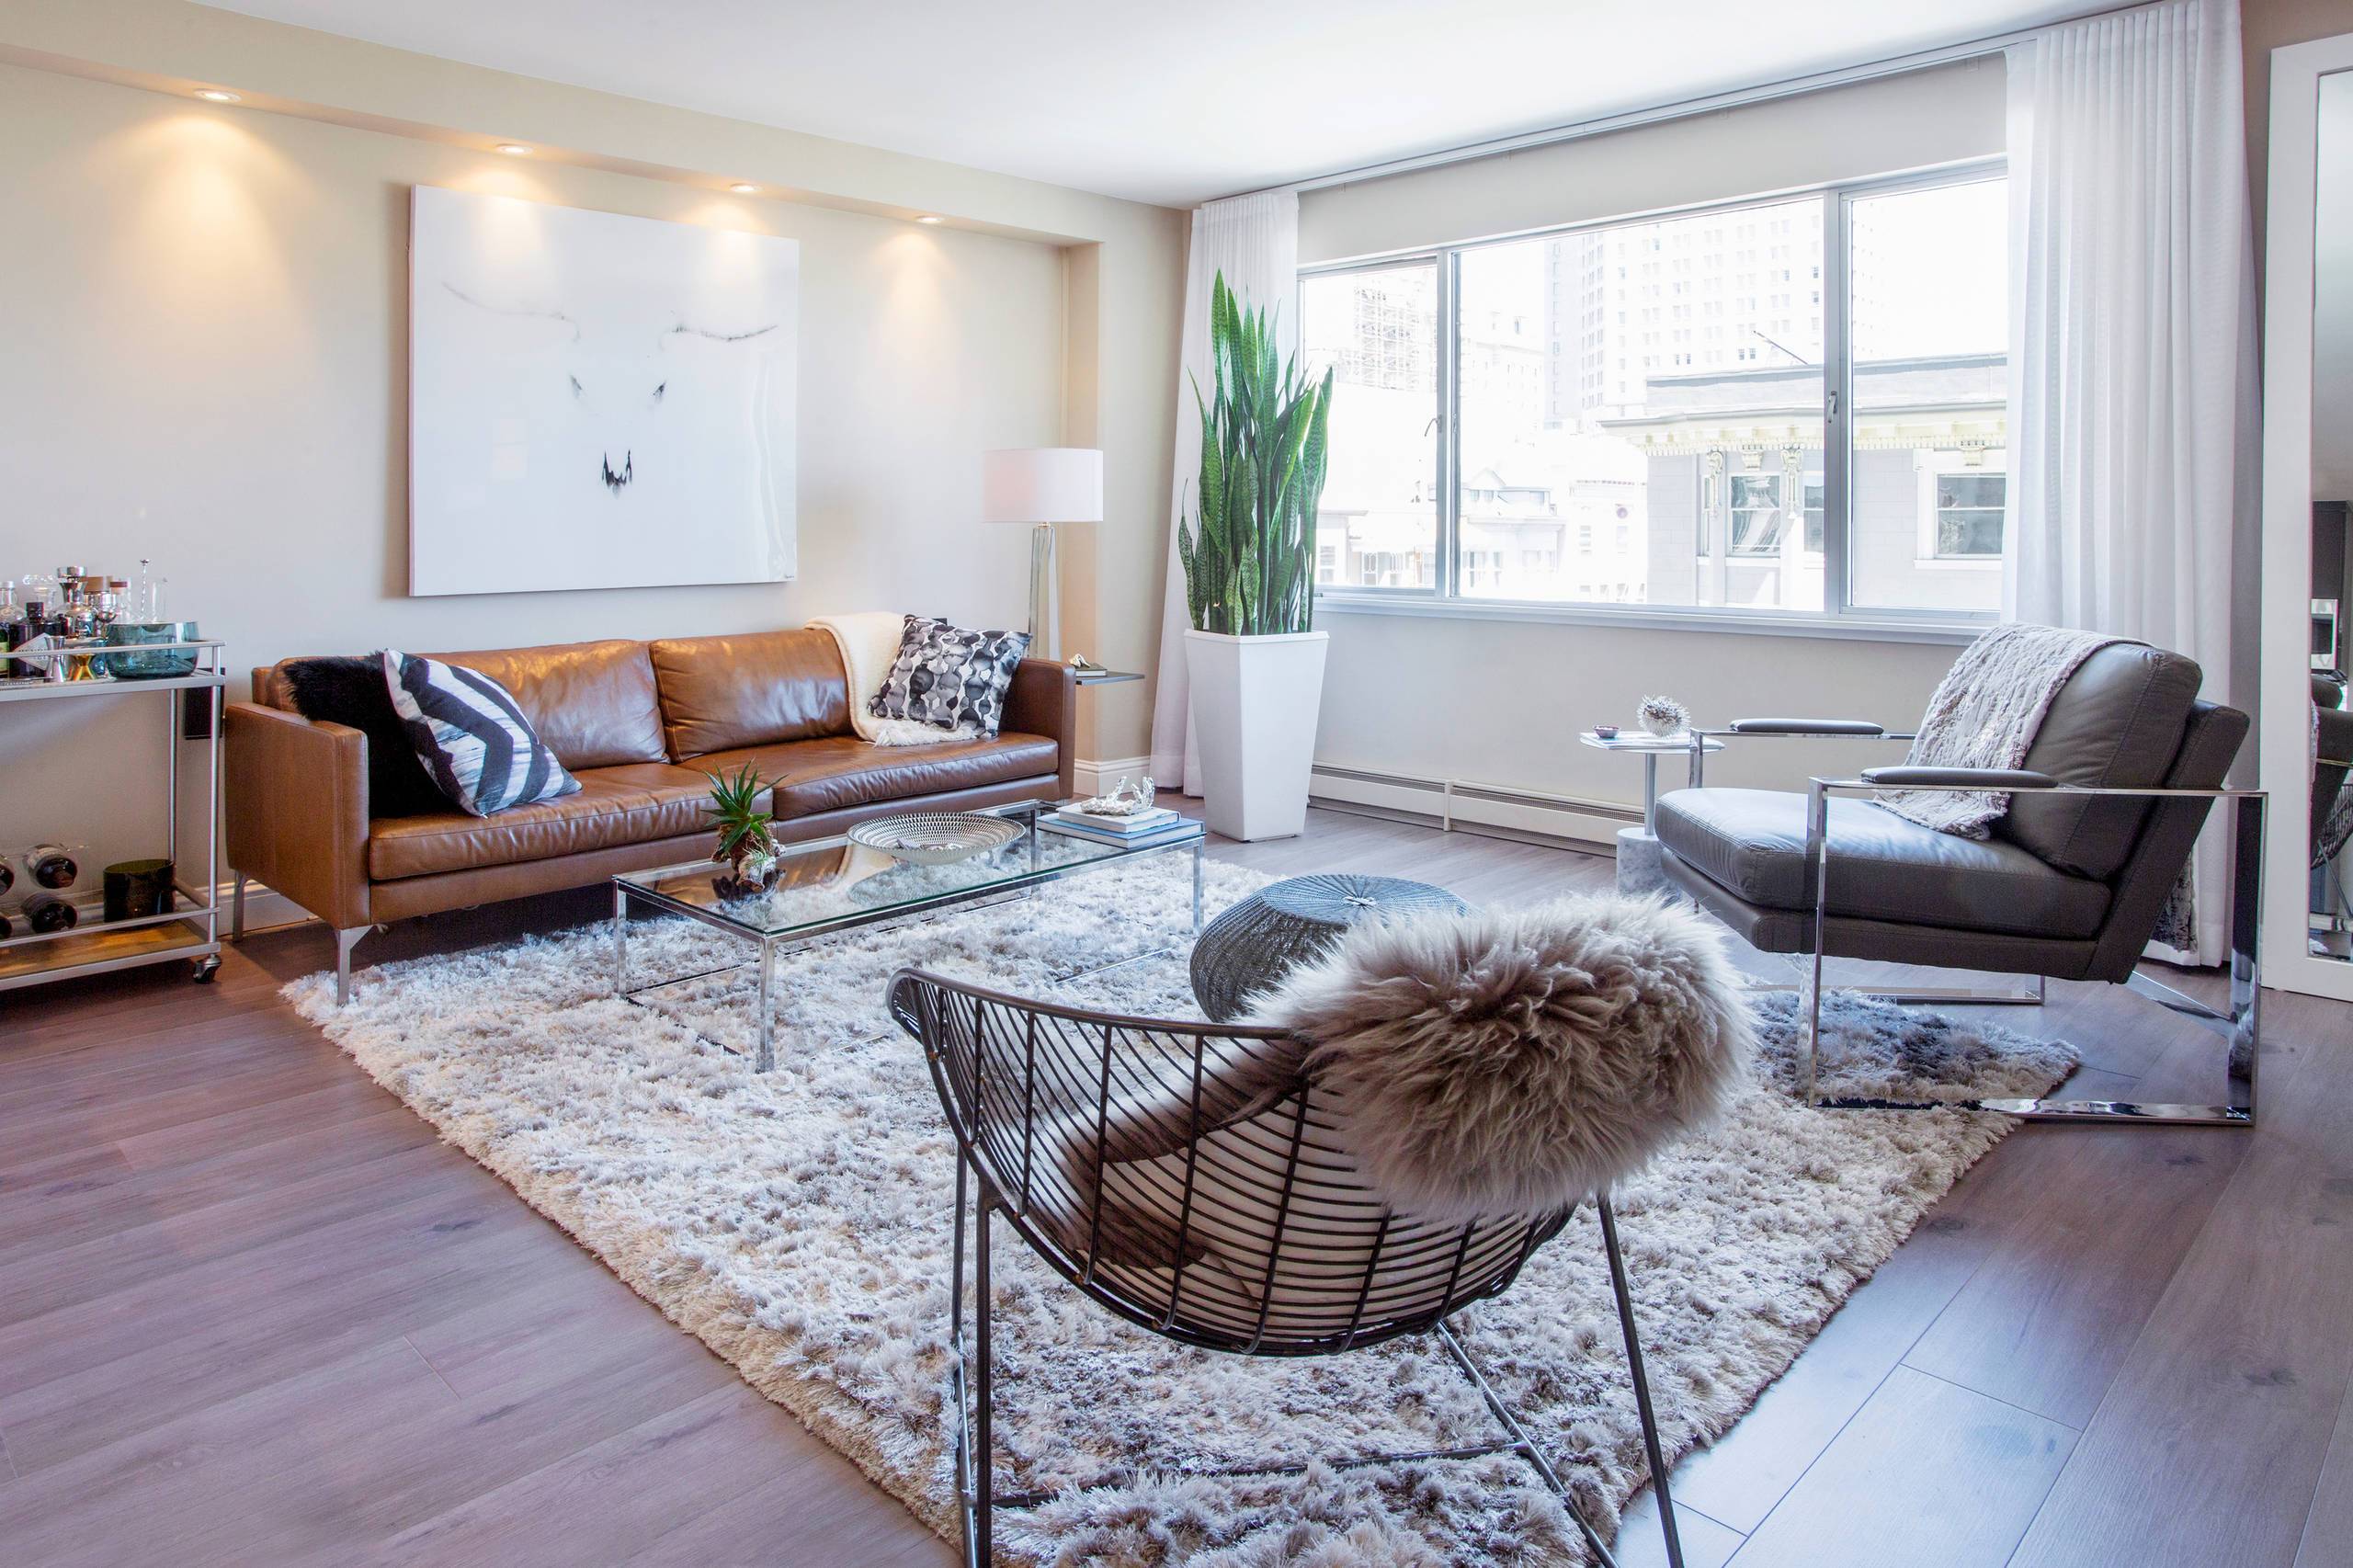 Contemporary style and warm vibes (from Houzz)